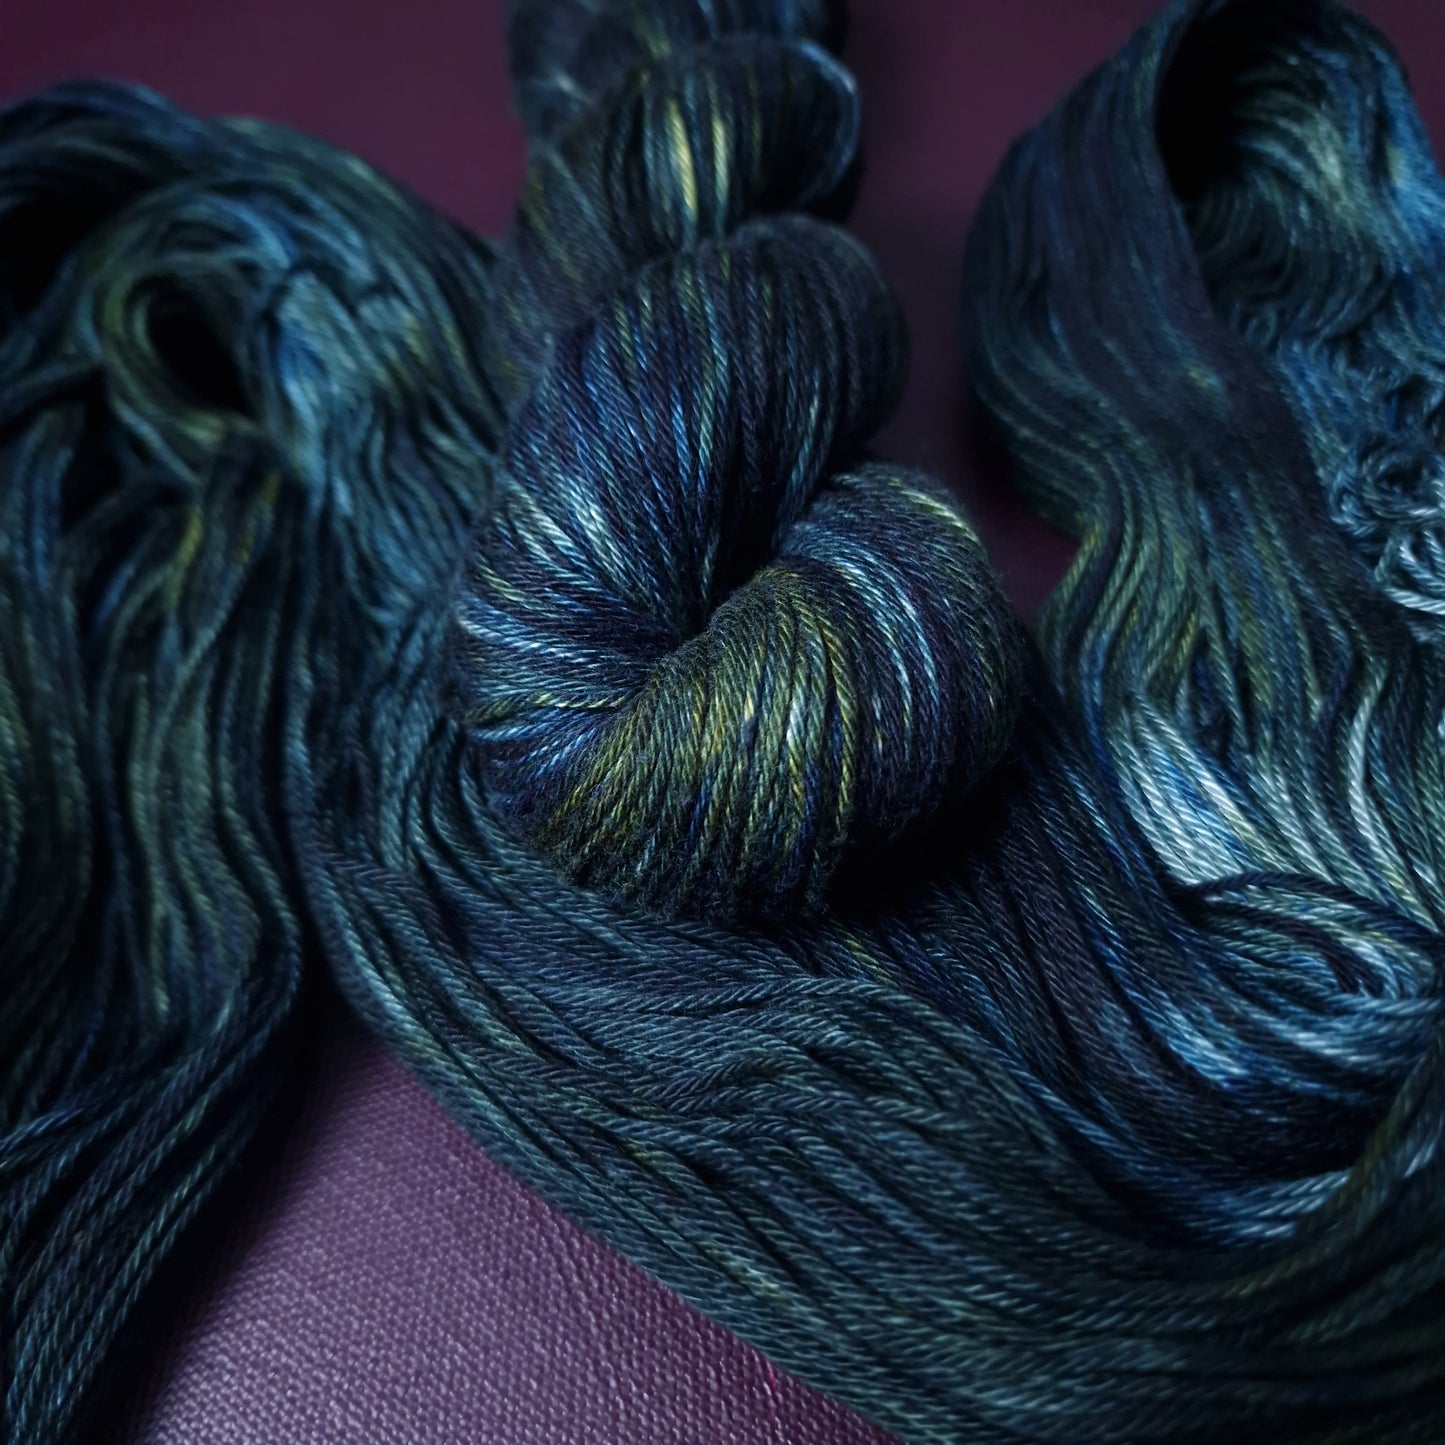 Hand dyed yarn ~ Starry Night ~ mercerized cotton yarn, vegan, hand painted, indie dyed